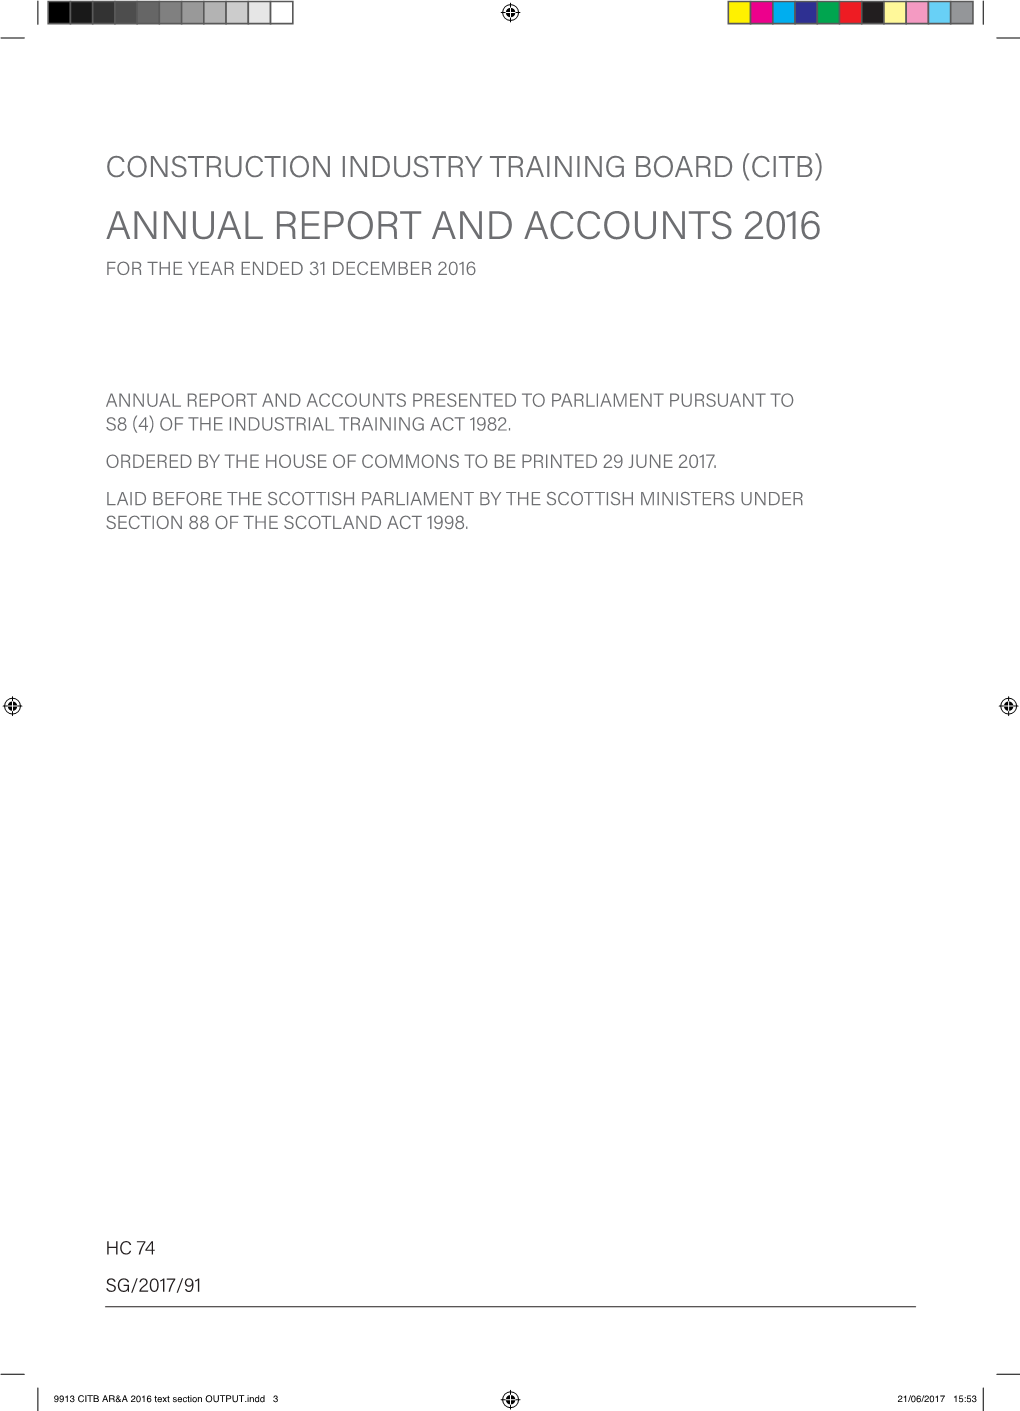 Annual Report and Accounts 2016 for the Year Ended 31 December 2016